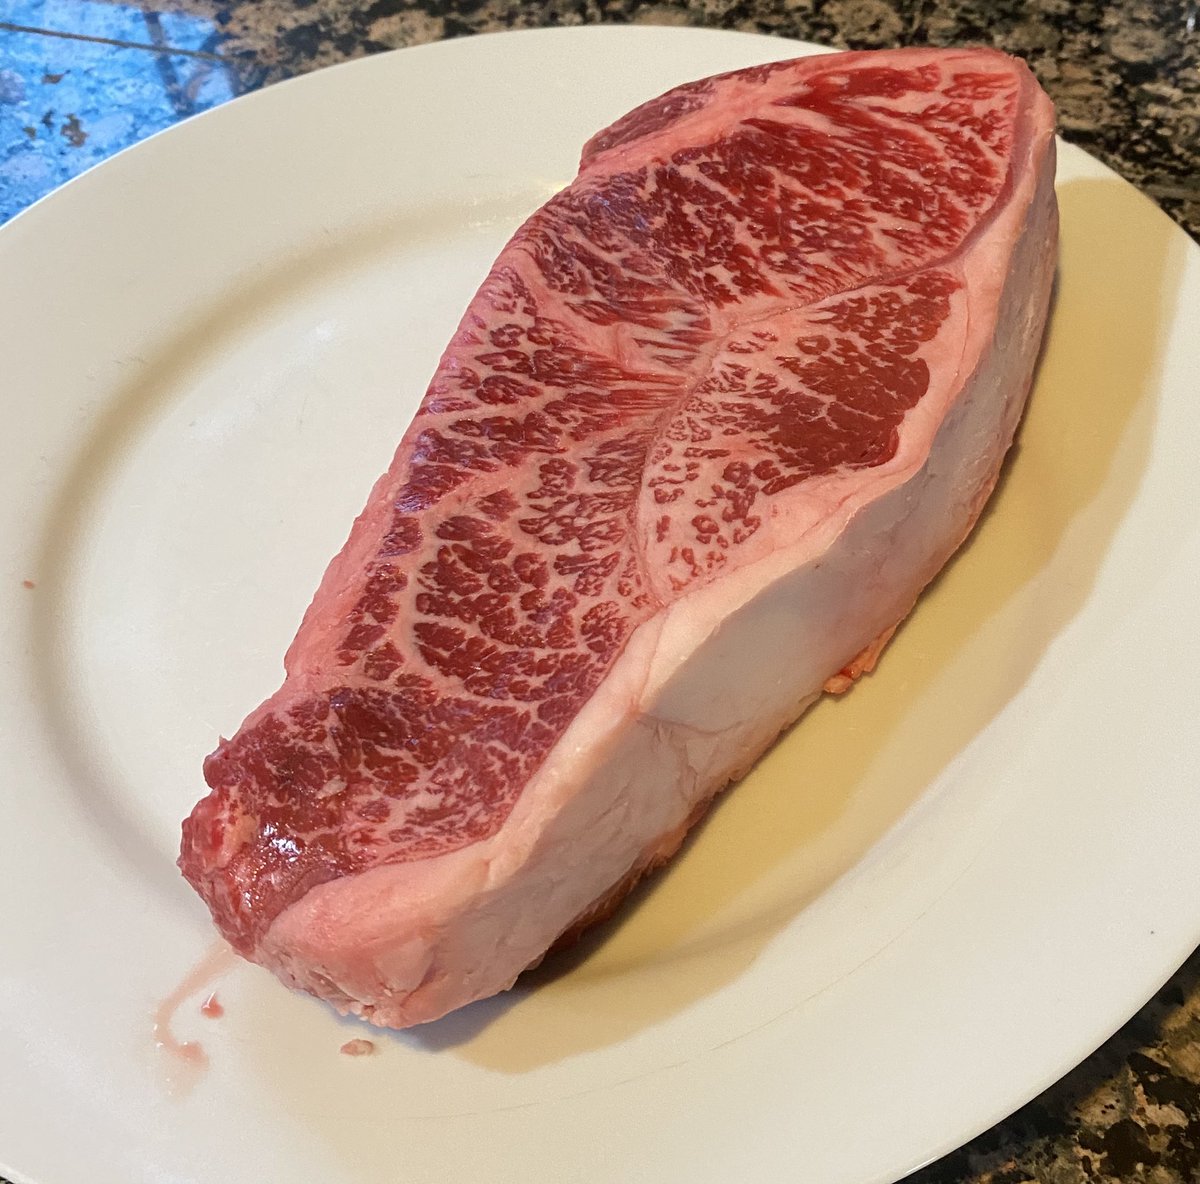 Tonight’s Downtown Fry’s American Wagyu NY strip for $27 is this beautiful 22 ounce sacrifice that I will cook rare and maybe die after I eat it but it’s worth it tbh